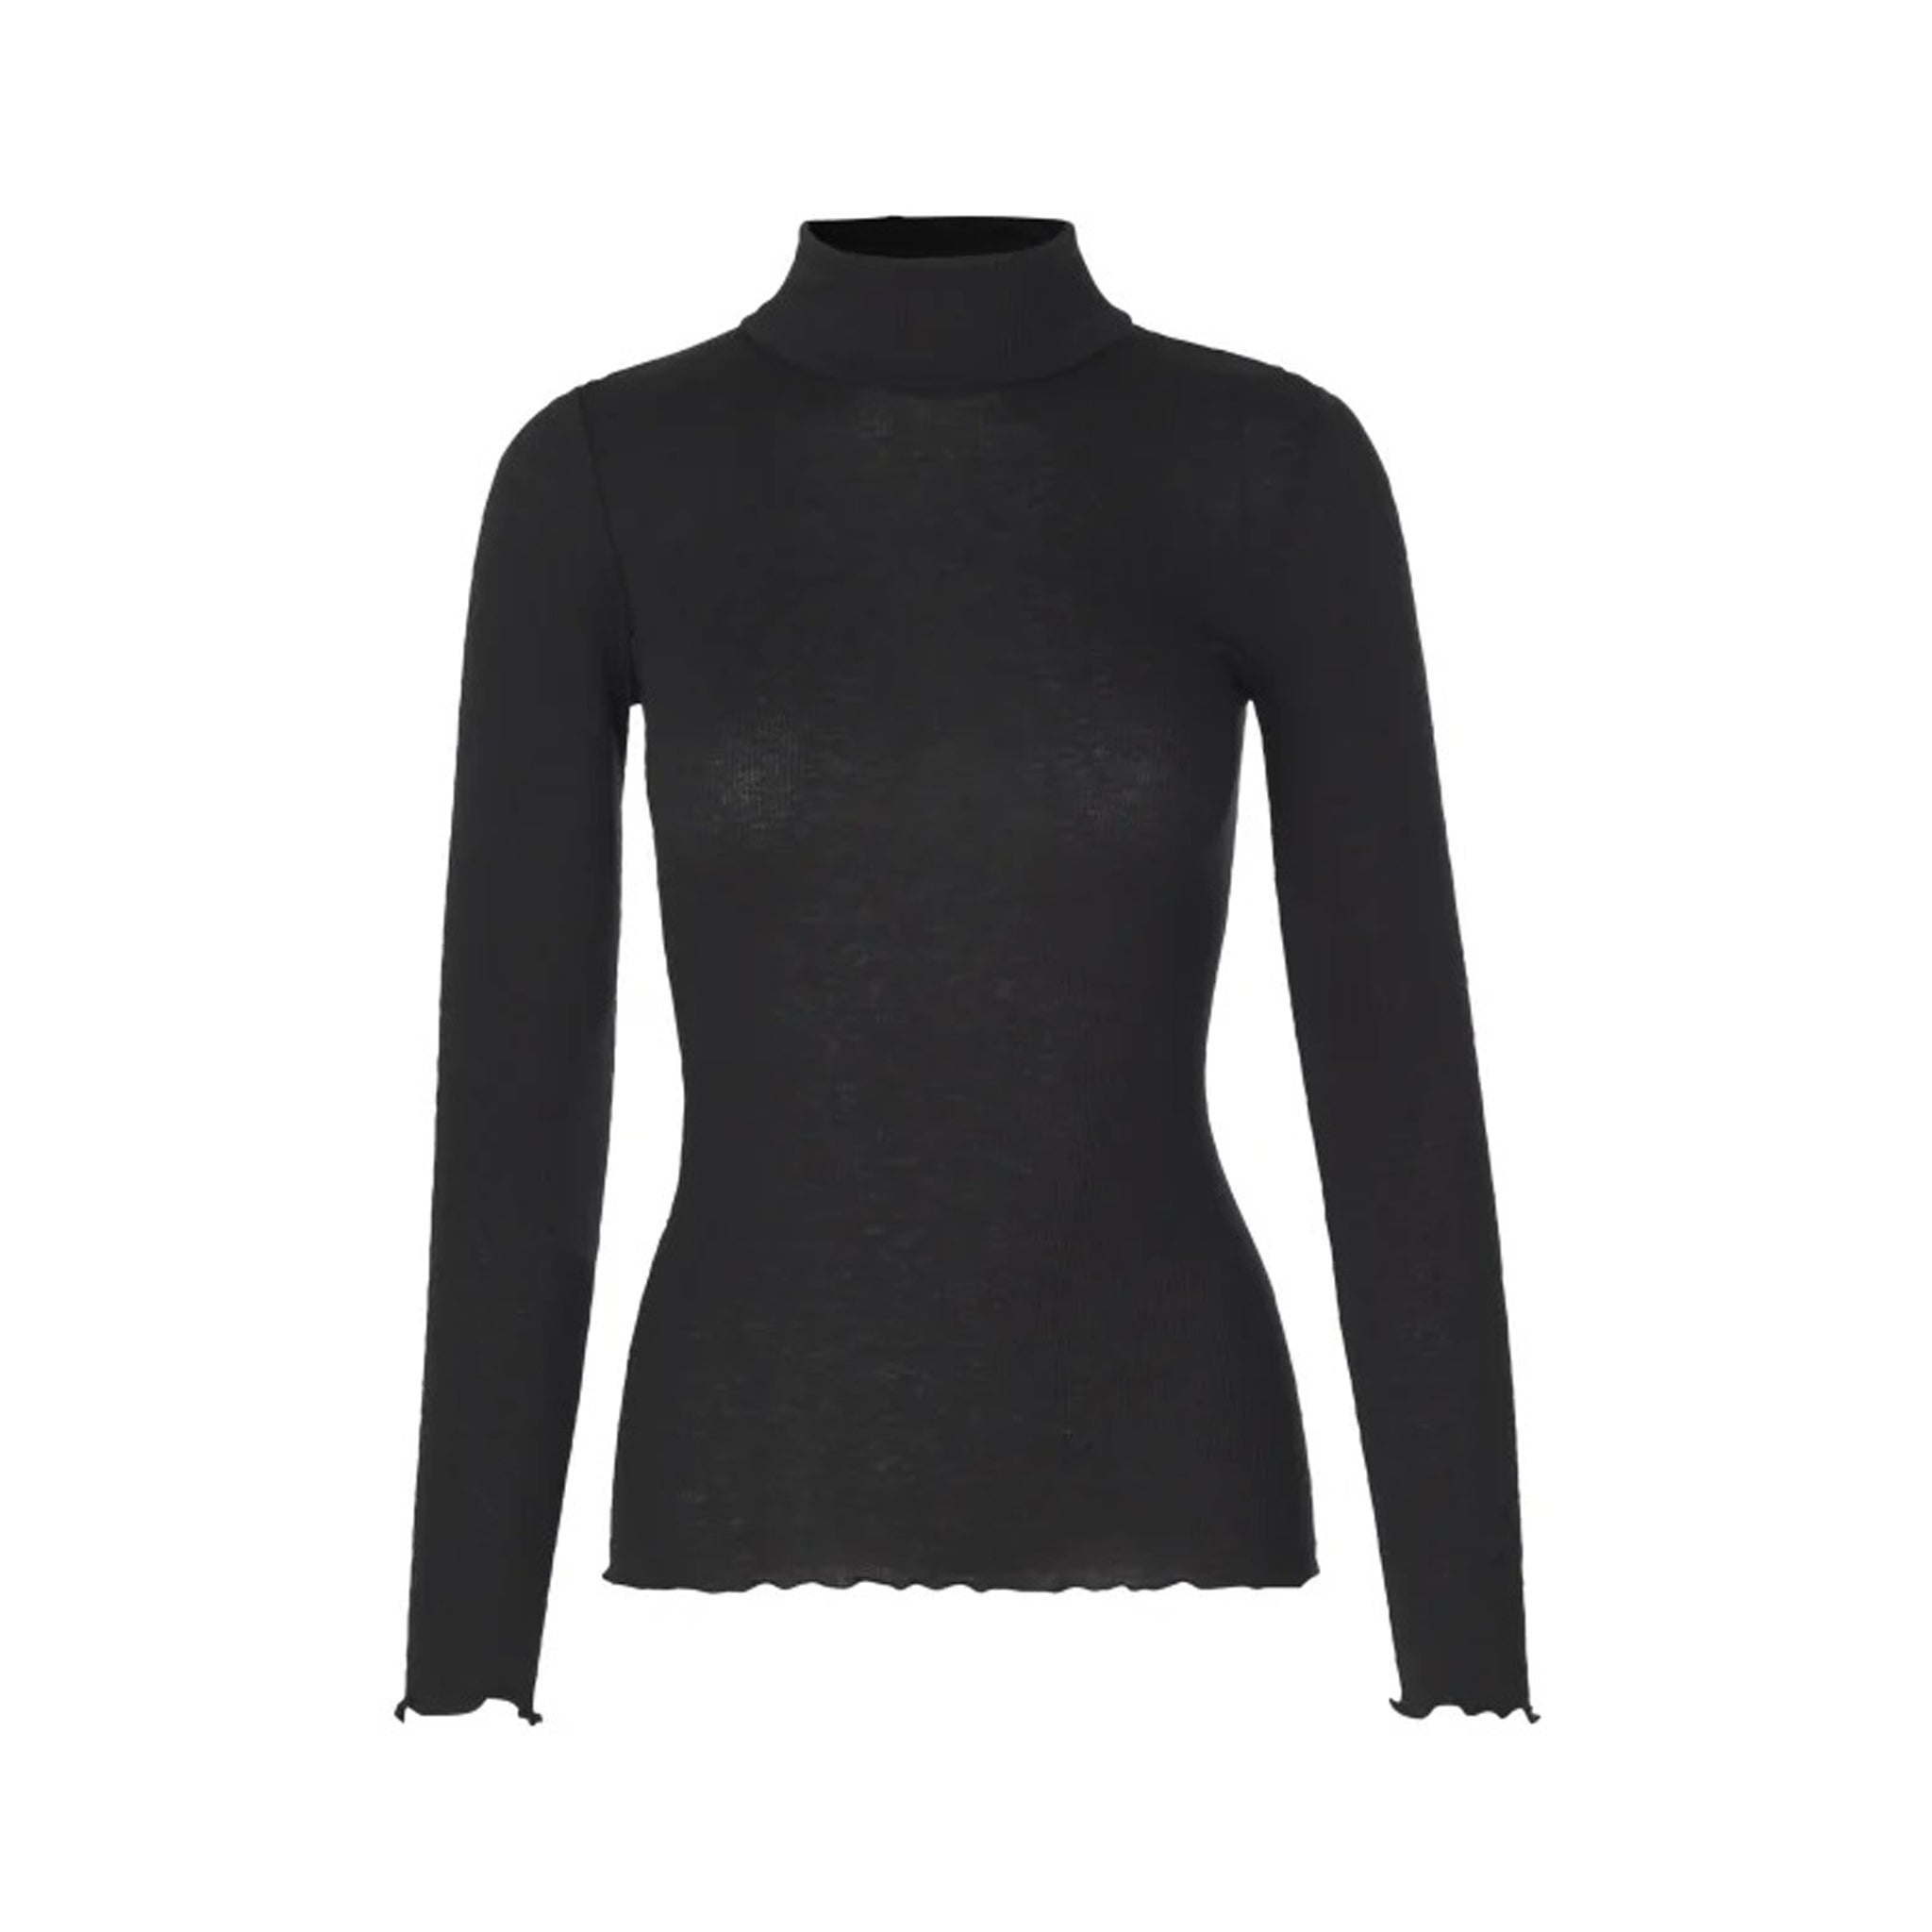 This women's black wool turtleneck top by Rosemunde is a cooler weather essential. Made with a comfortable wool blend fabric, it is perfect for staying warm and stylish.